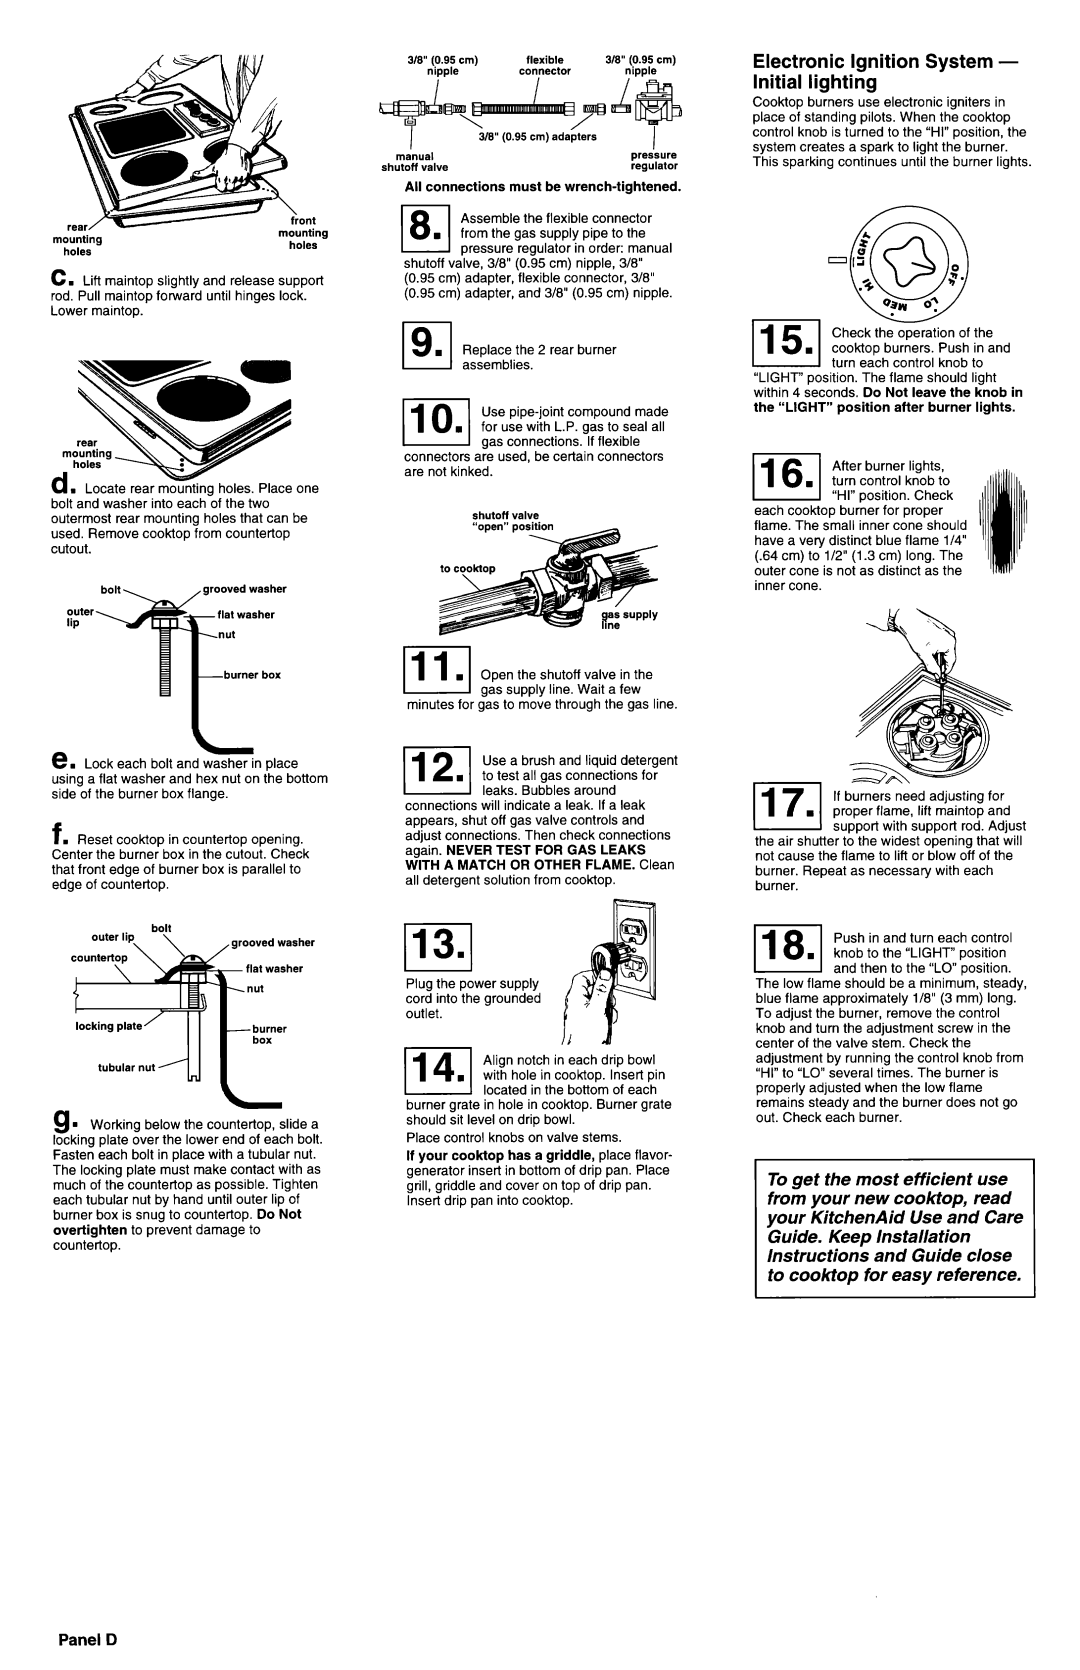 Whirlpool 3189086 installation instructions Electronic Ignition System - Initial lighting, 113.1, Panel D 